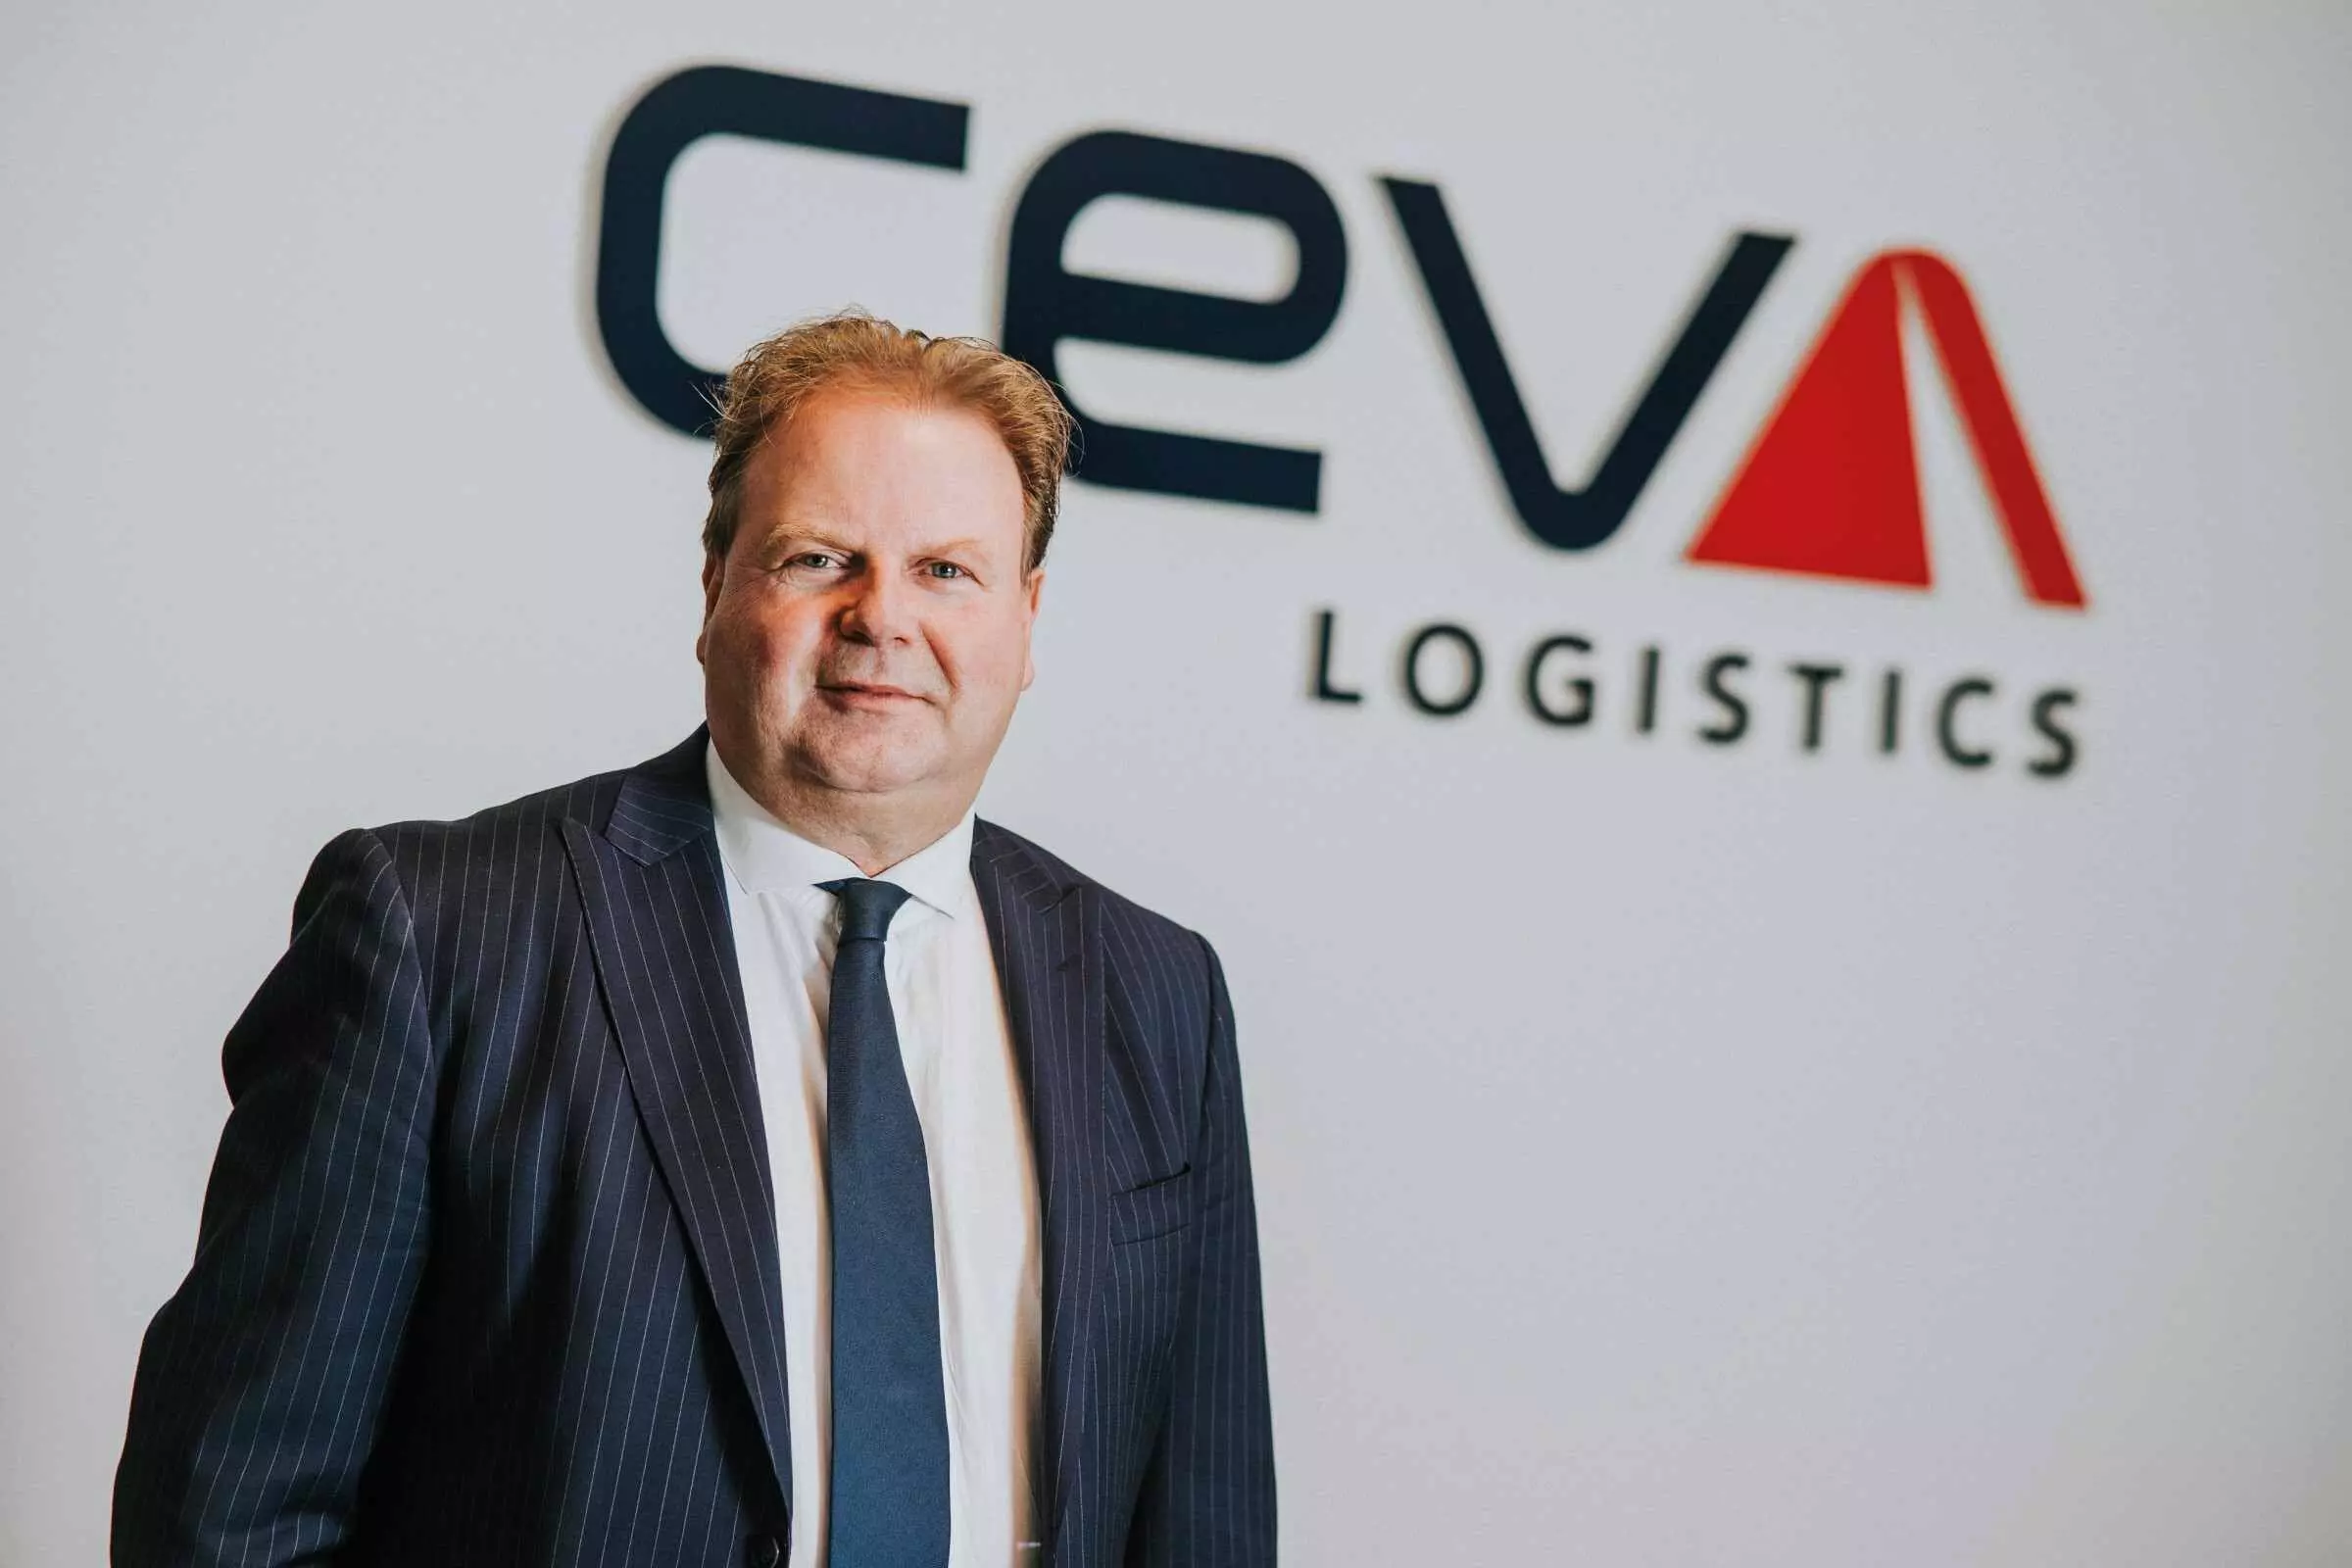 20% of our total CEVA revenue could come from eCommerce-related activities by 2025